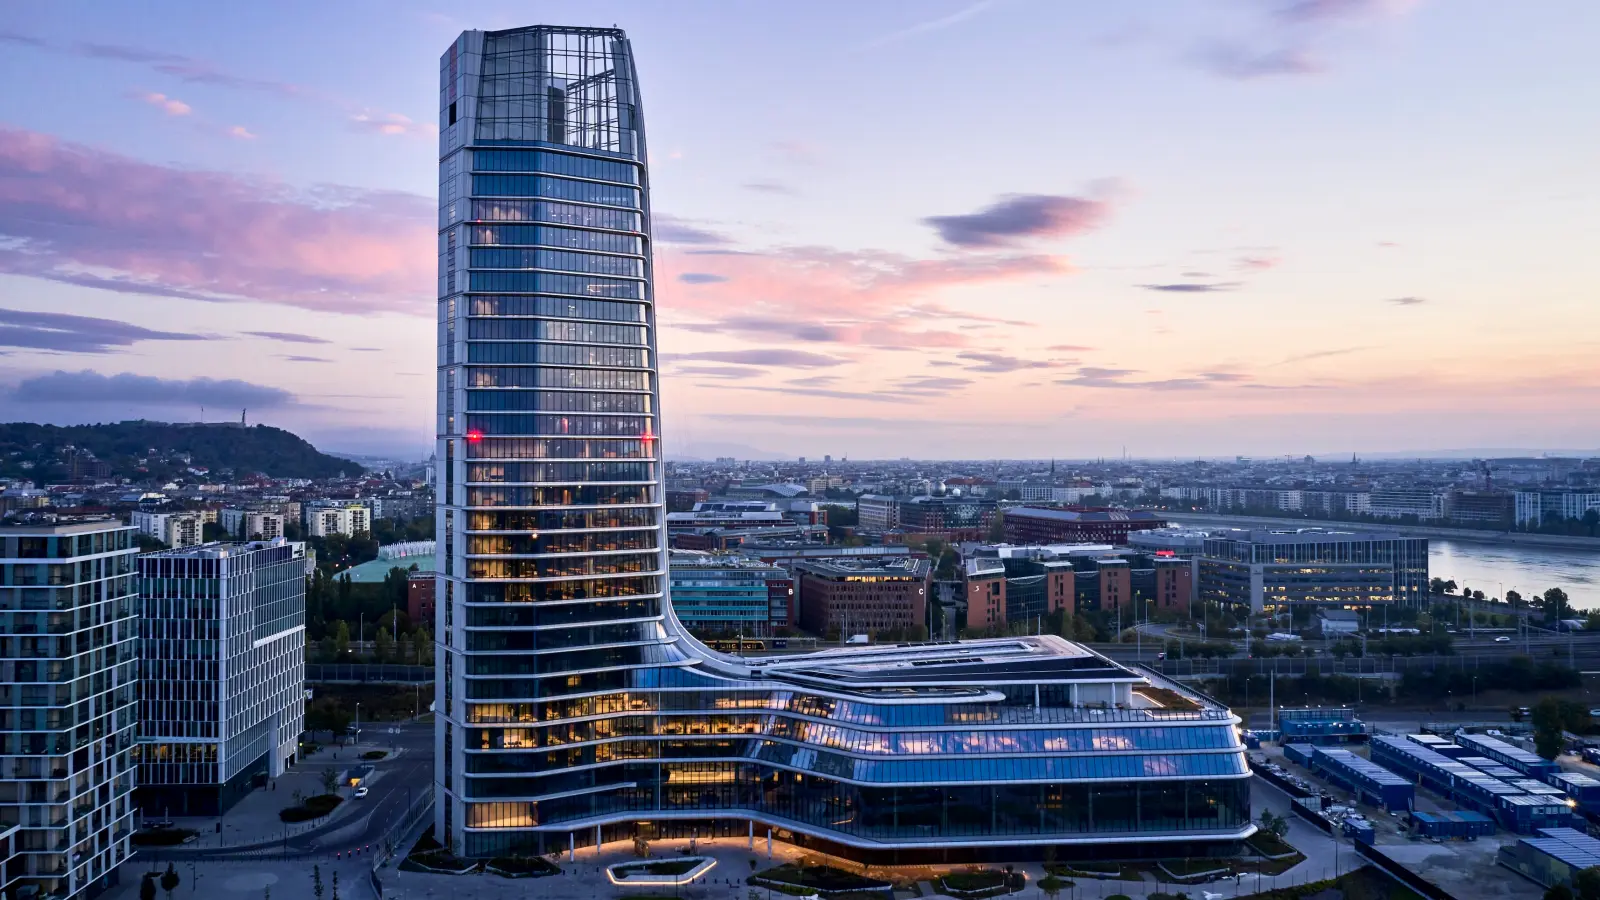 Visible from afar: MOL Campus, with its 143-metre tower and adjacent podium, is now the tallest building in Hungary.